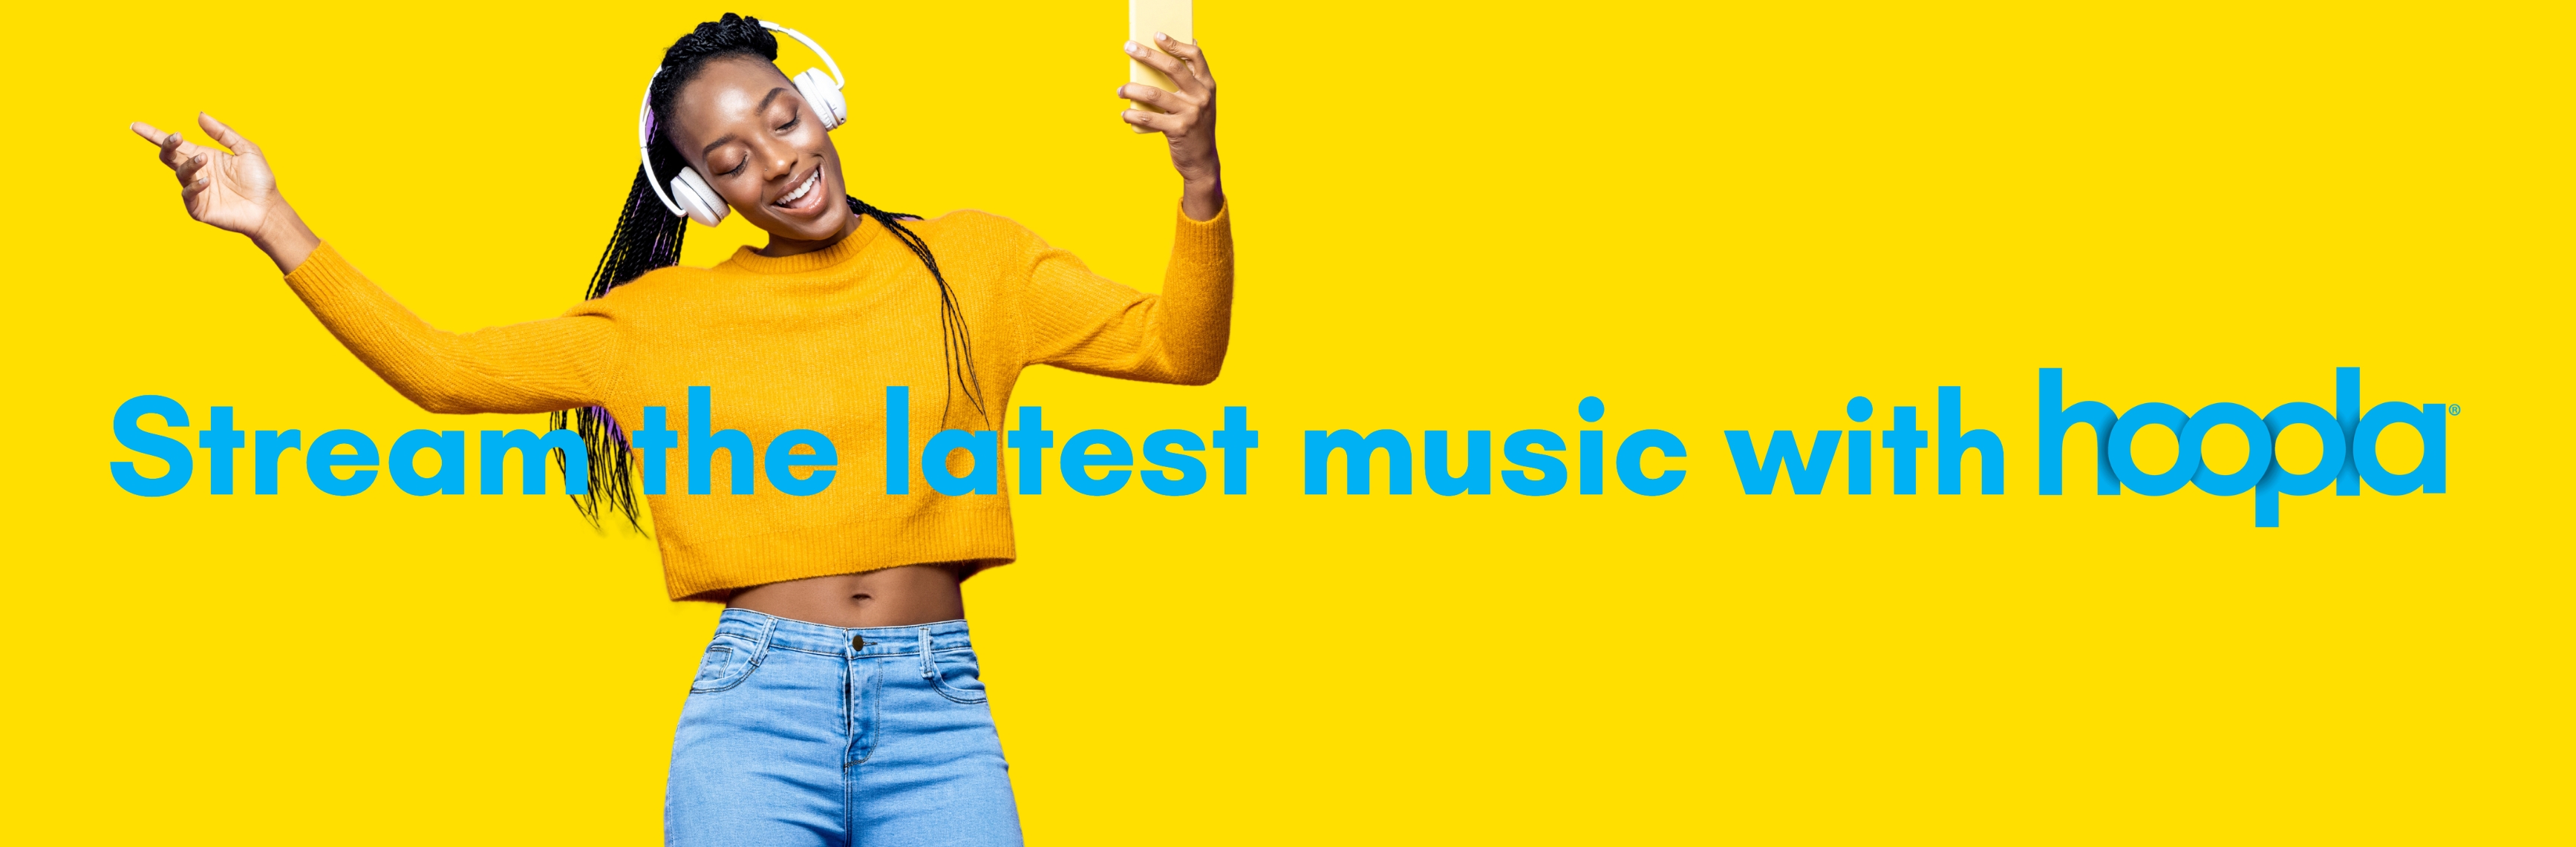 Image for "Stream the latest music with Hoopla"